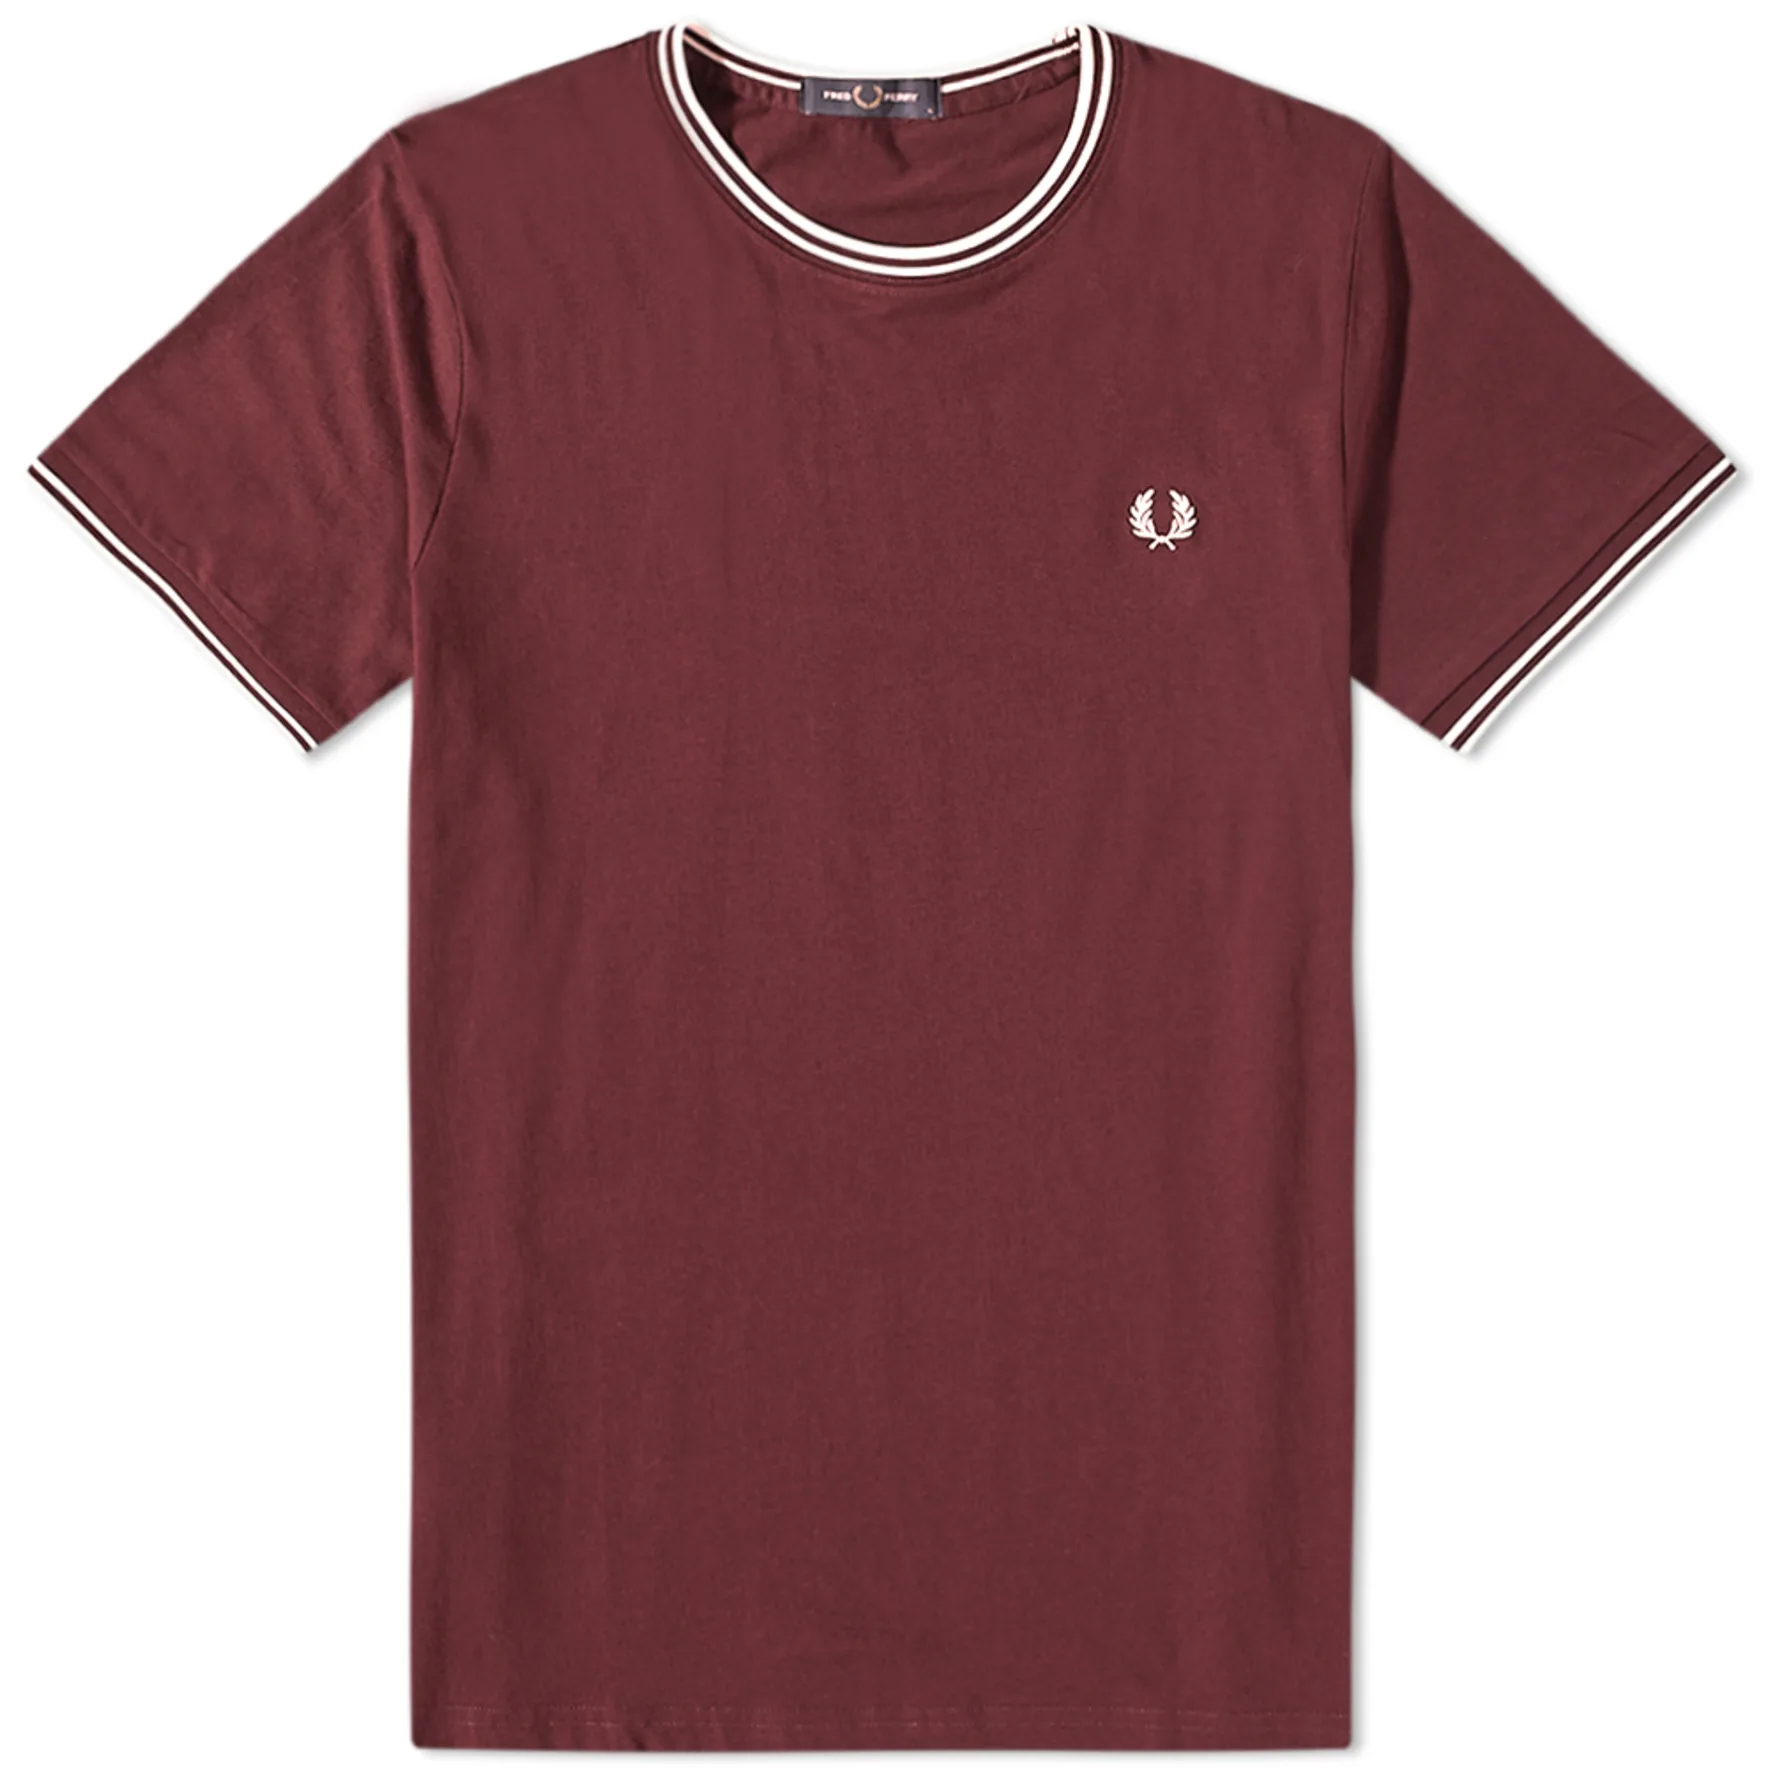 Футболка Fred Perry Authentic Twin Tipped, бордовый футболка fred perry original twin tipped polo